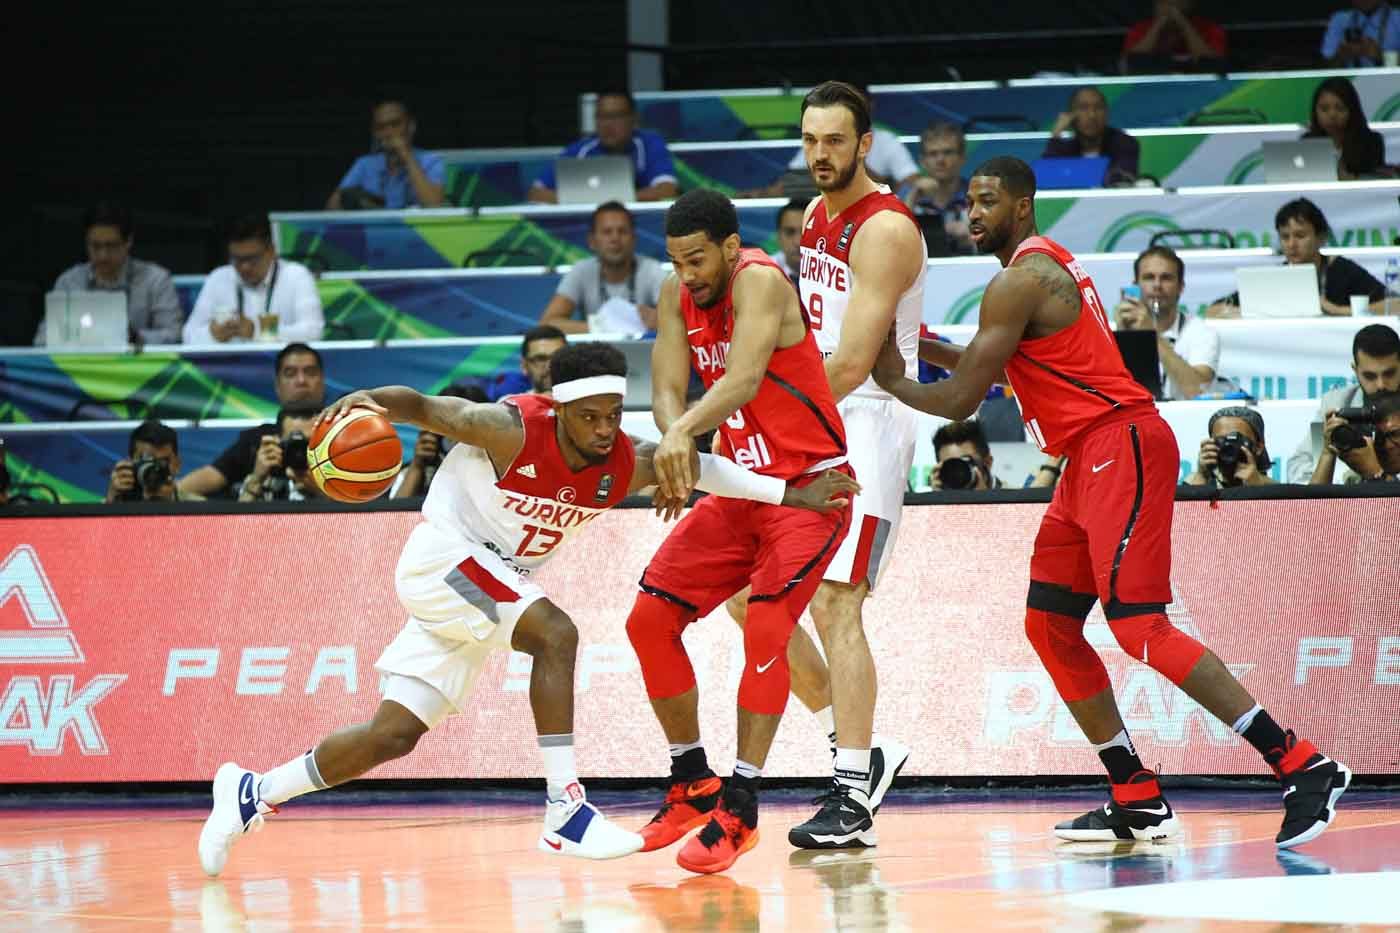 Muhammed Ali, also known as Bobby Dixon, of Turkey makes his move against Canada. Photo by Josh Albelda/Rappler 